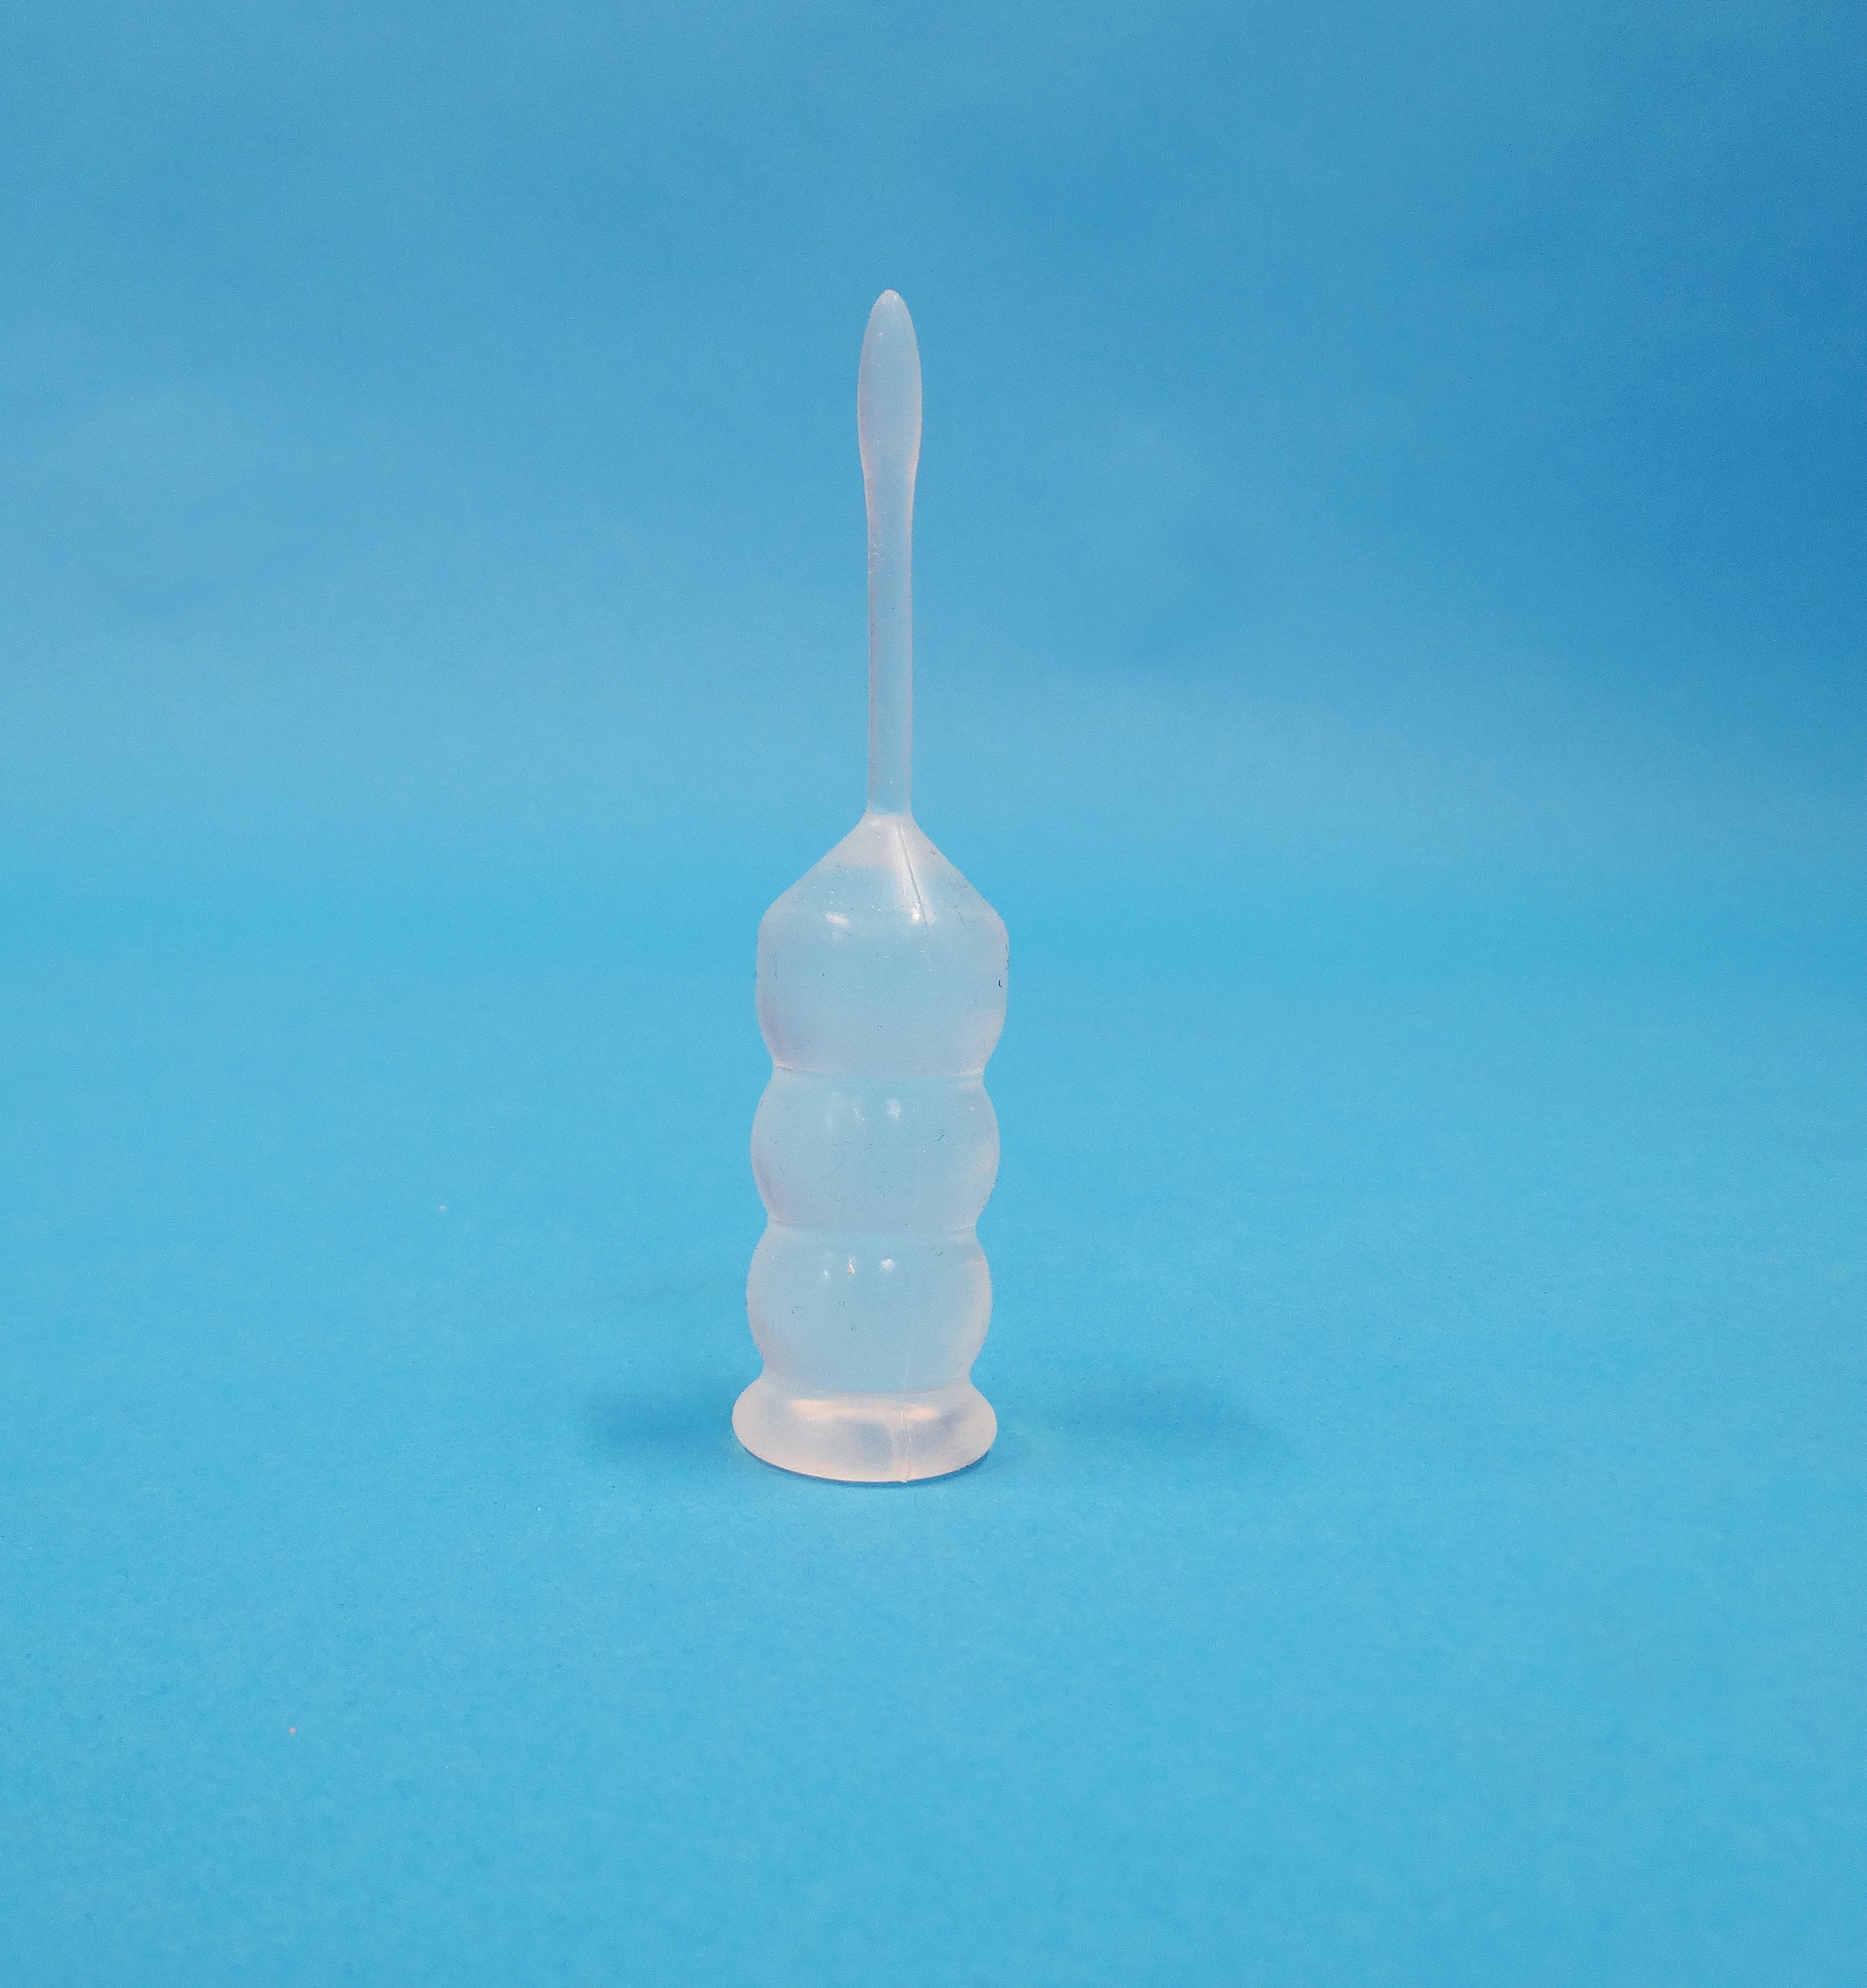 Female continence device